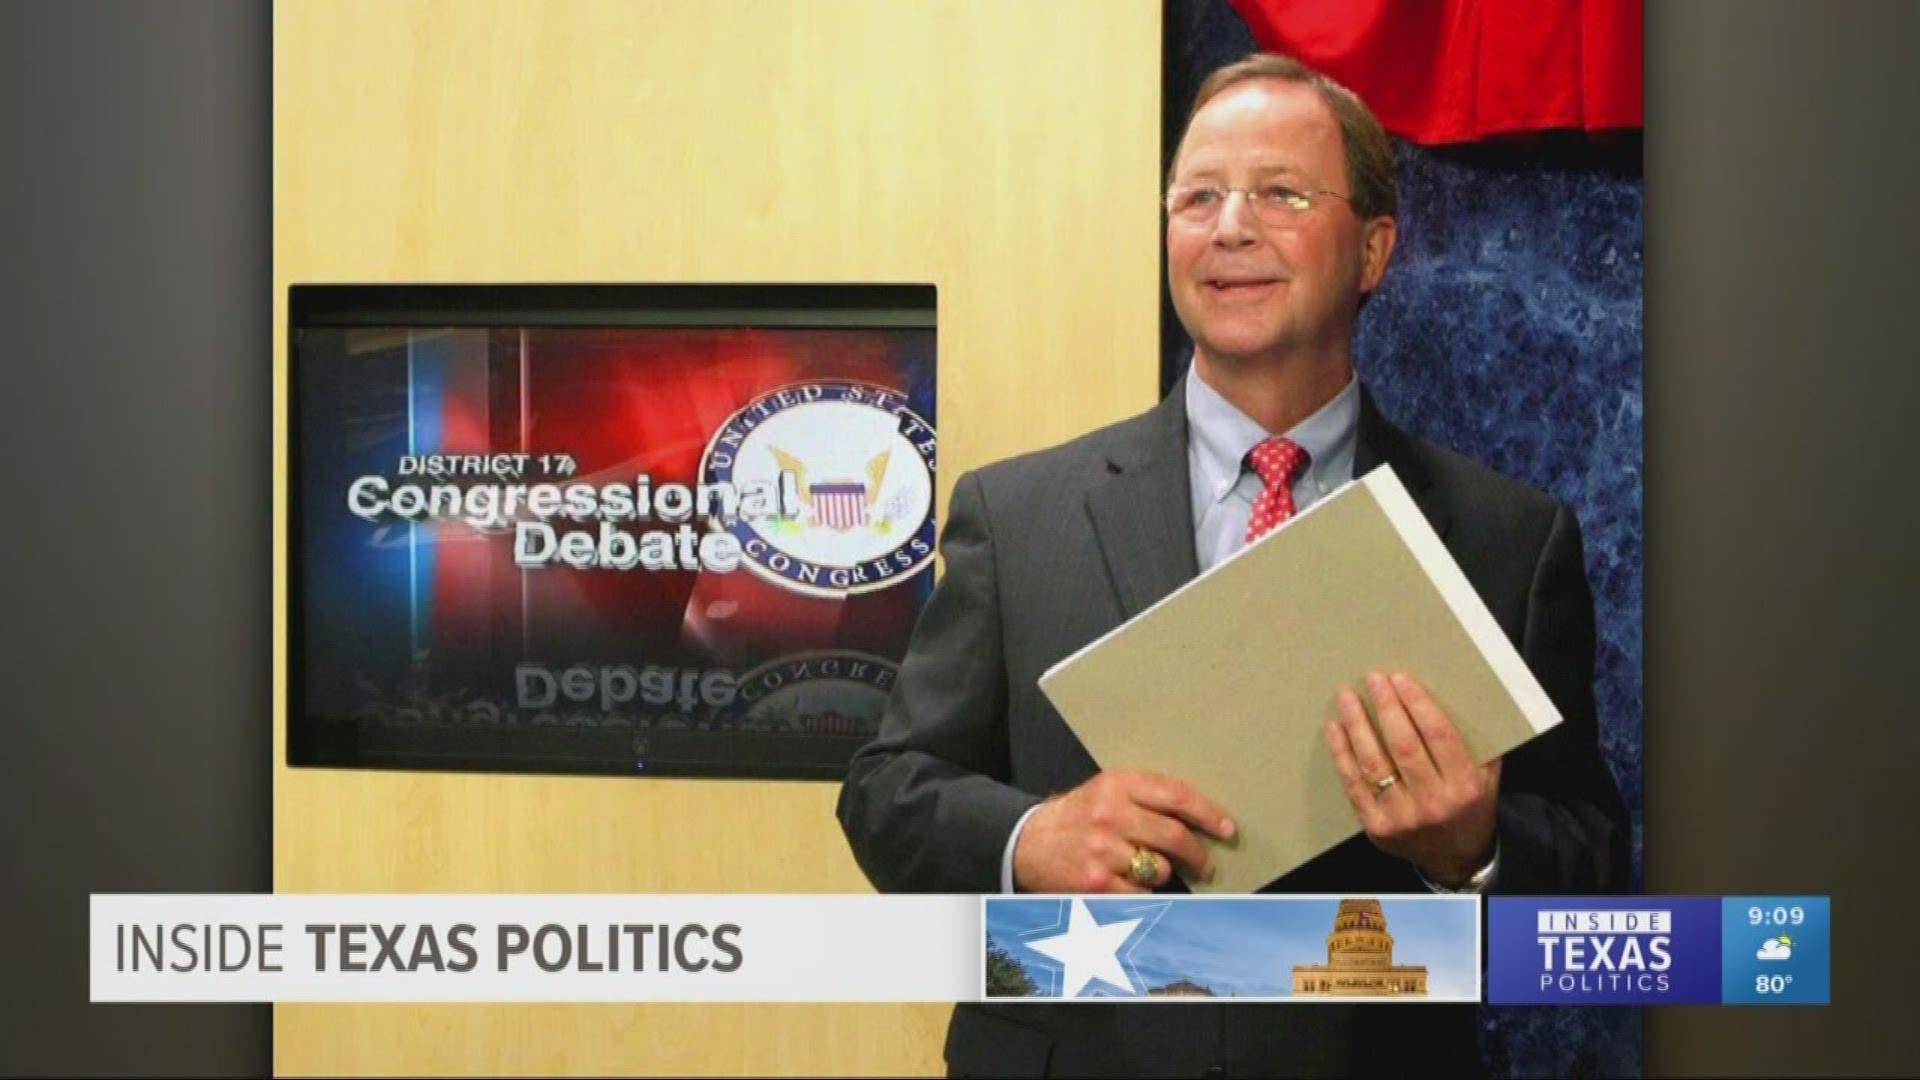 The Texodus continues. Republican U.S. Representative Bill Flores, from Waco, is the latest Texan to leave D.C. He is not running for re-election. Congressman Flores is now the fifth Texas Republican leaving Congress.